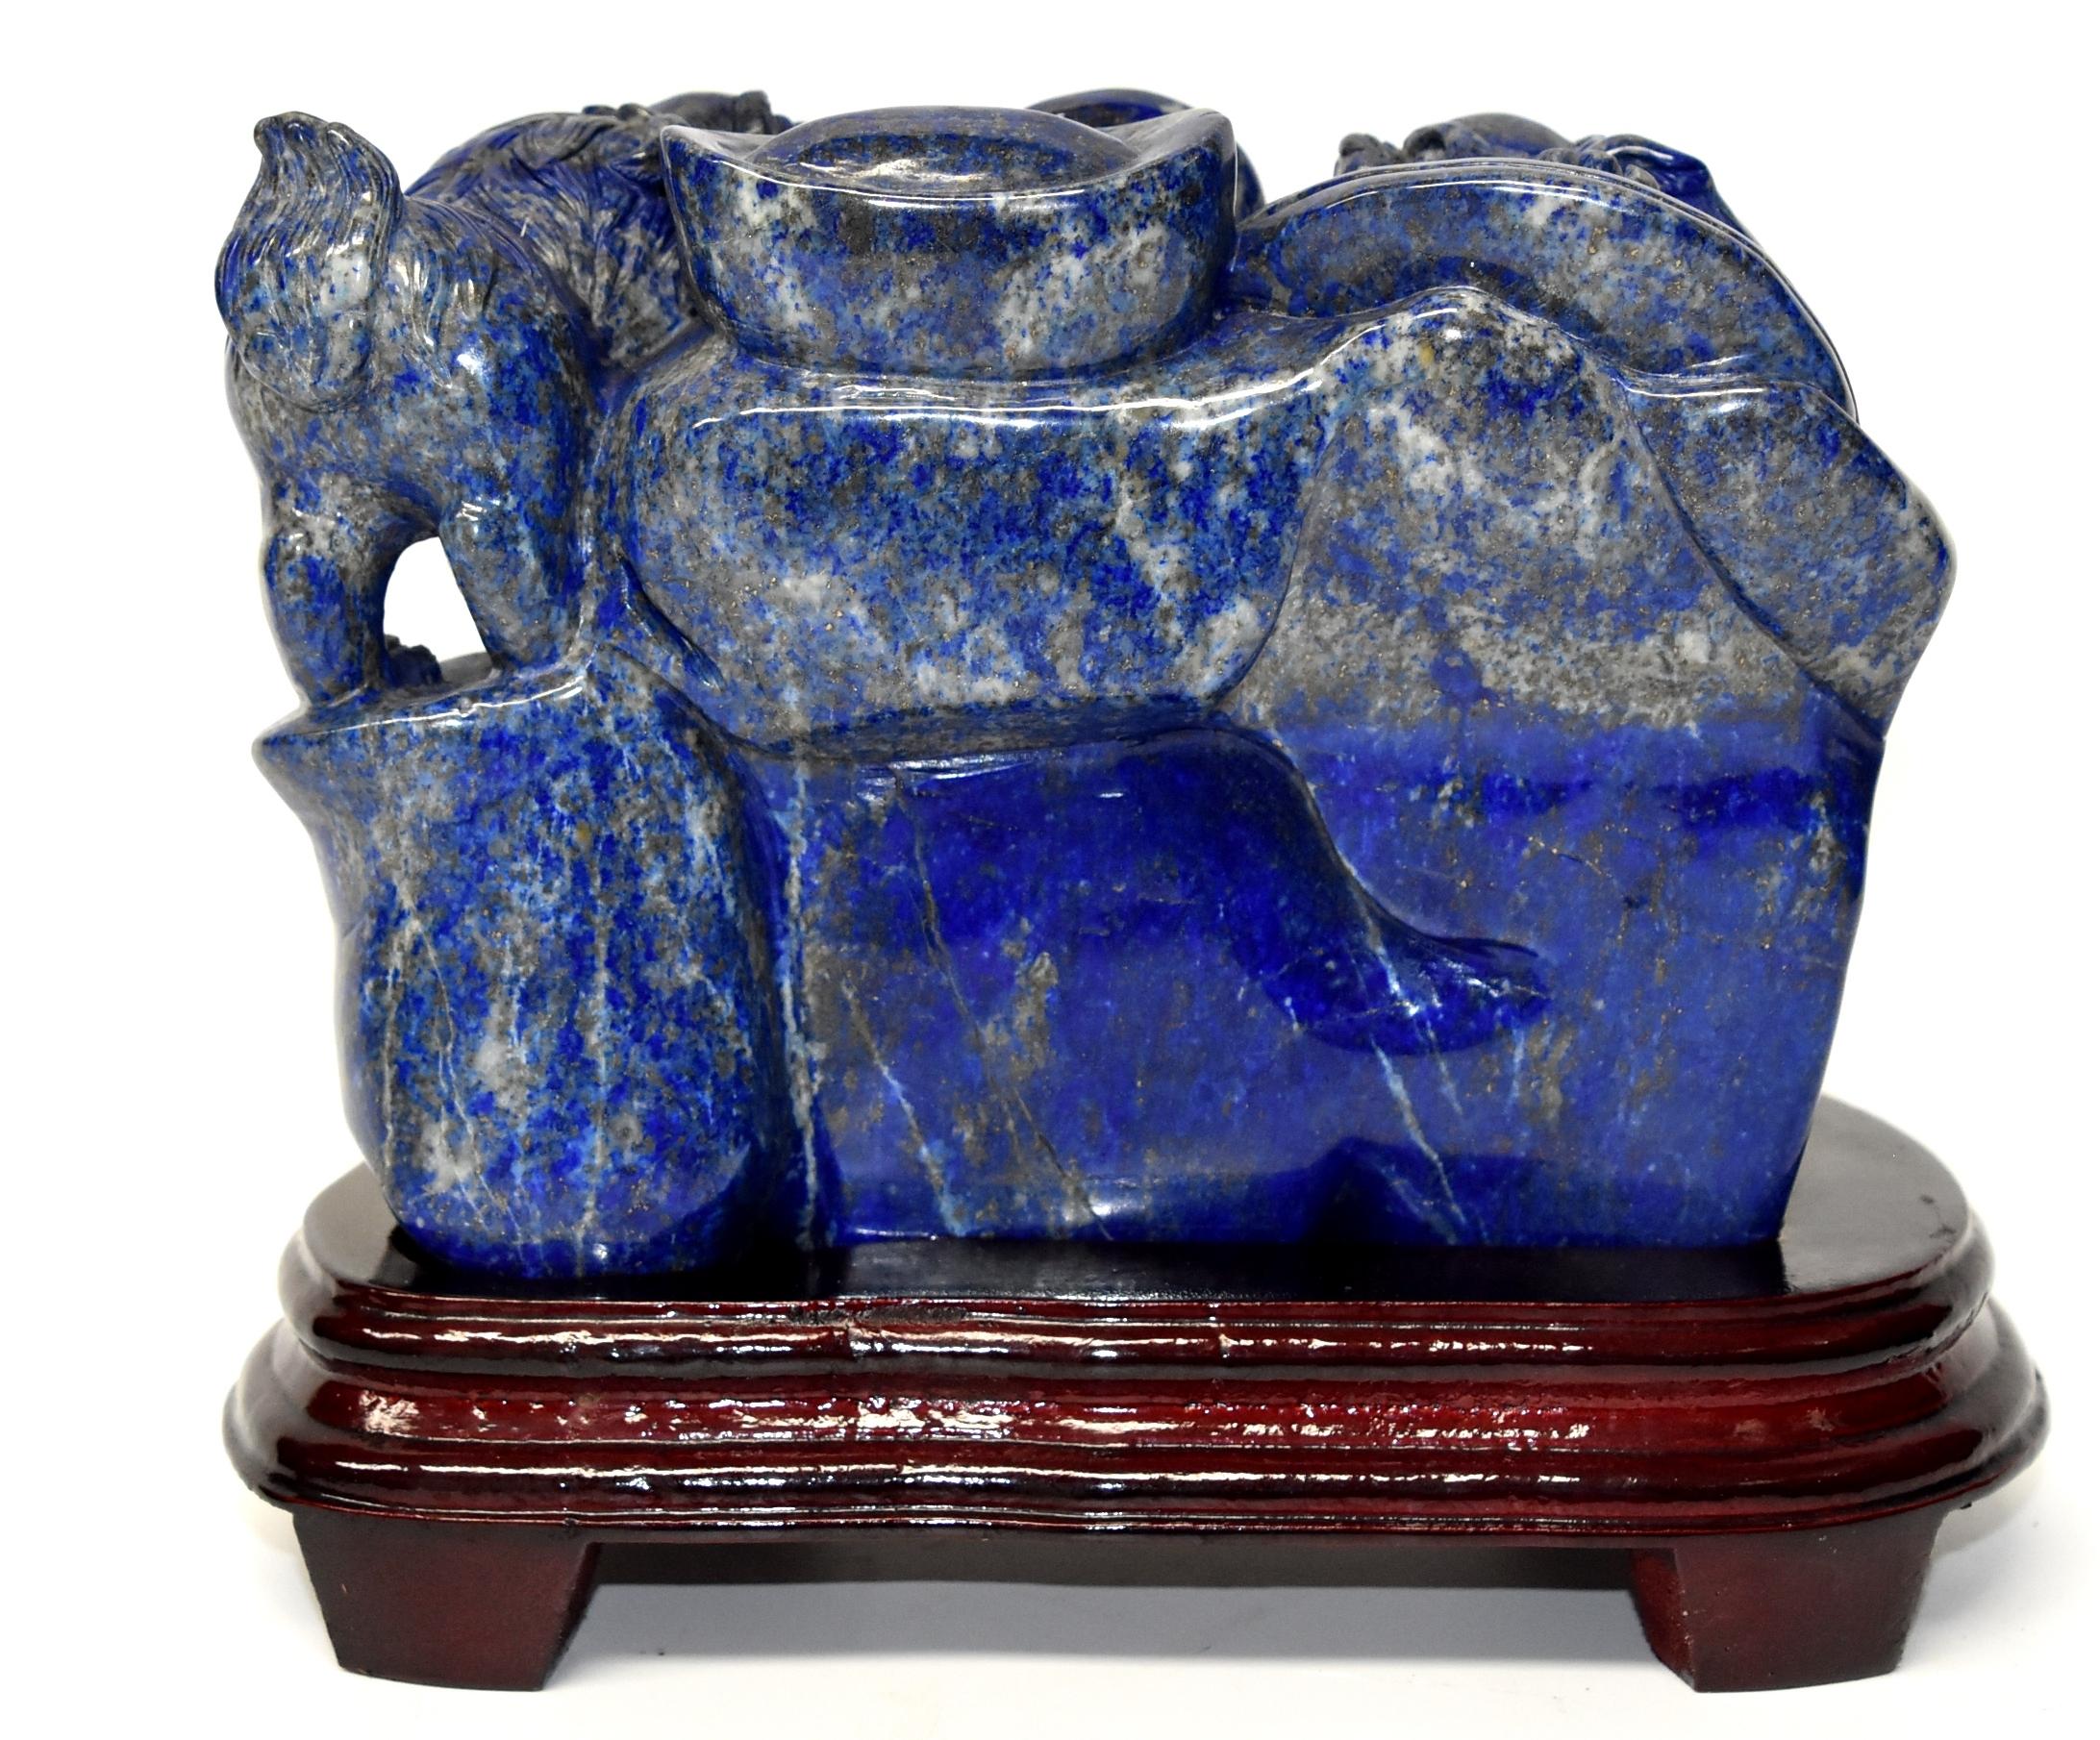 Natural Lapis Lazuli 8 lb Block with Carved Lions 13